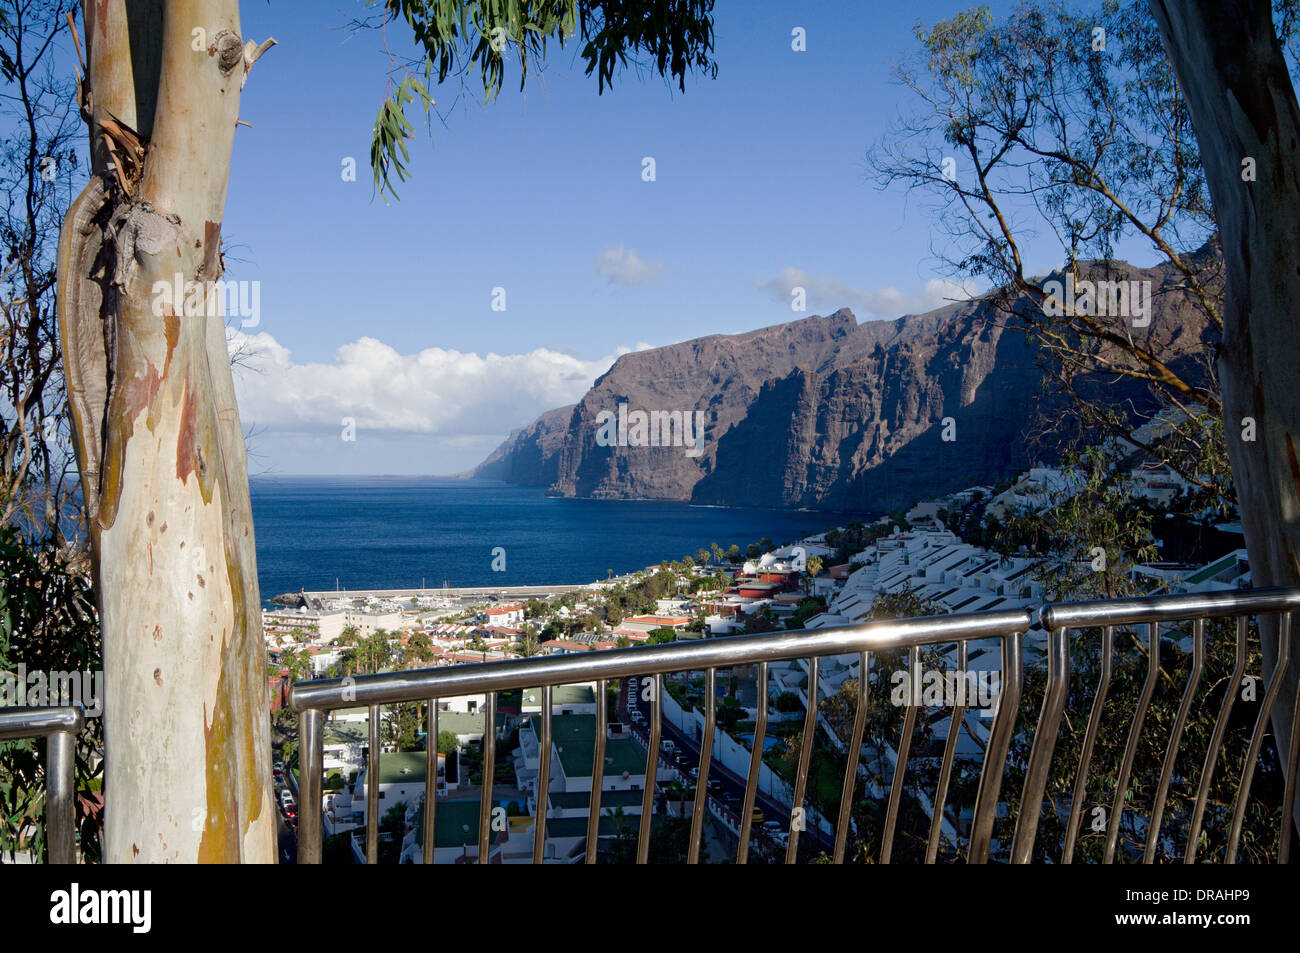 Los Gigantes and Los Gigantes cliffs, Tenerife, Canary Islands, Spain Stock Photo